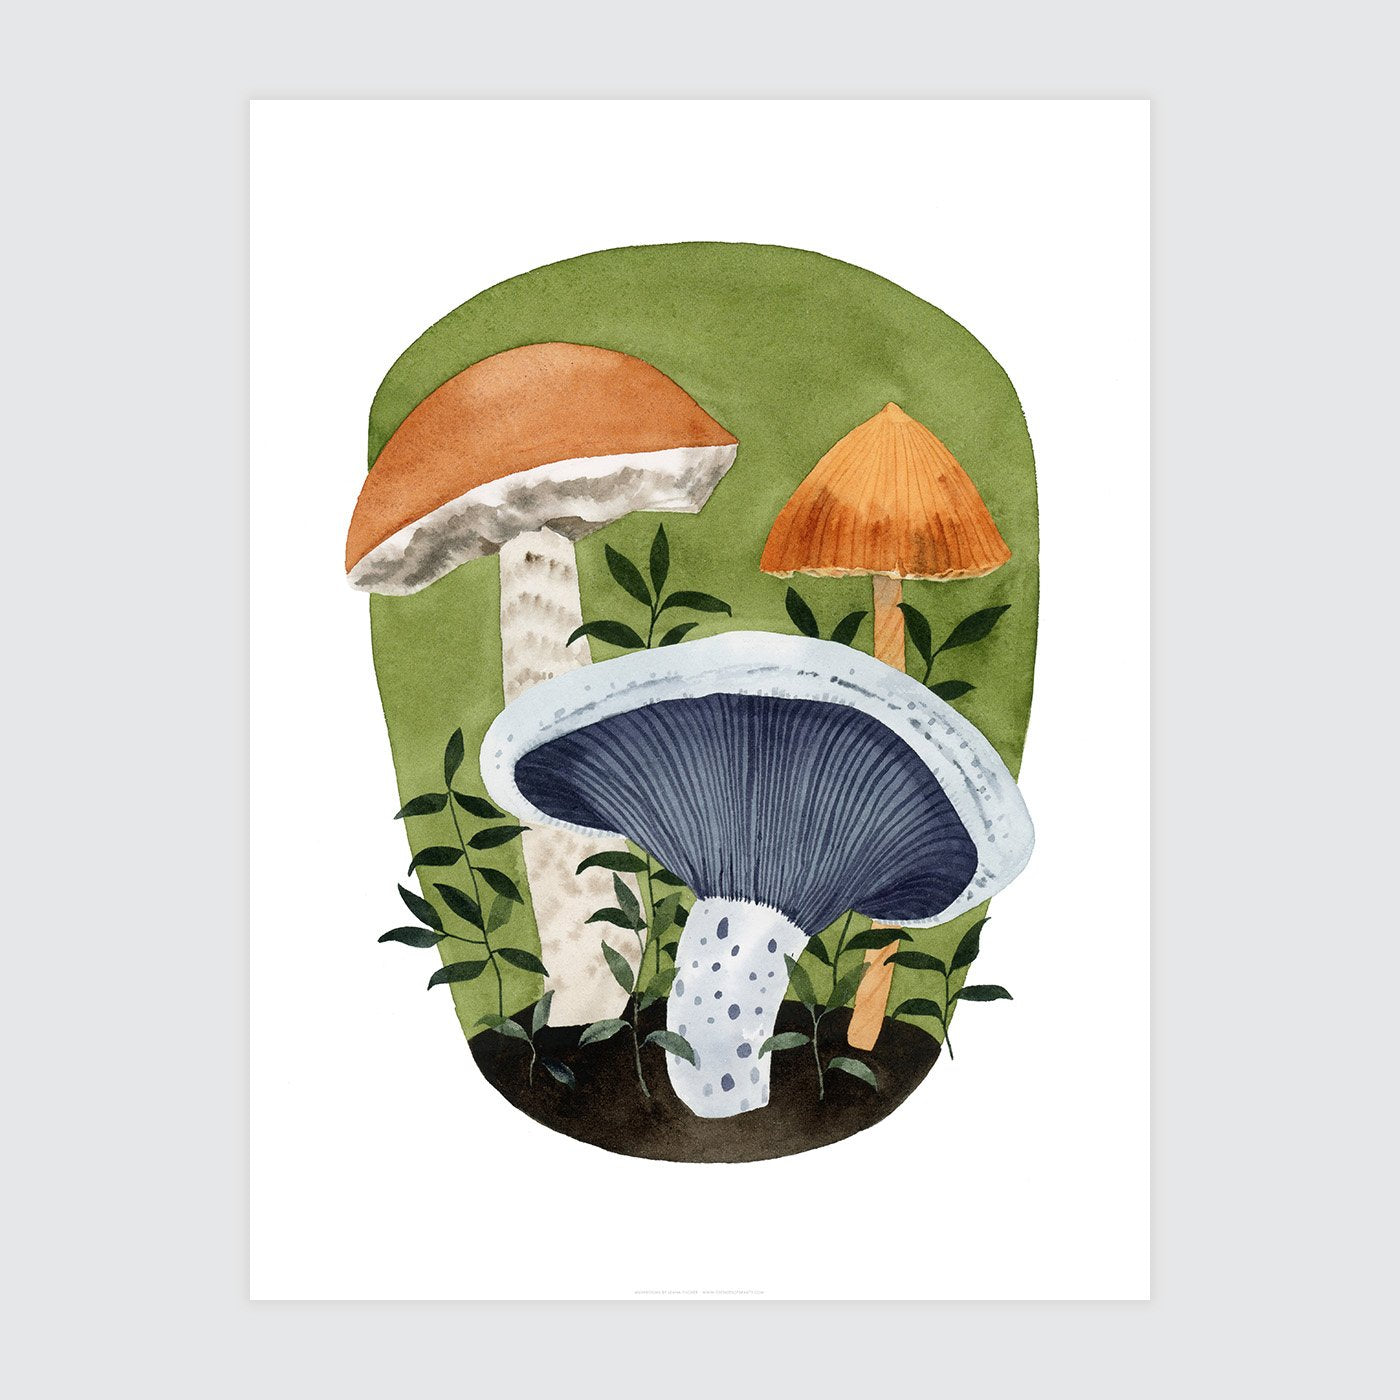 I can't get over how beautiful these linocut prints of mushrooms